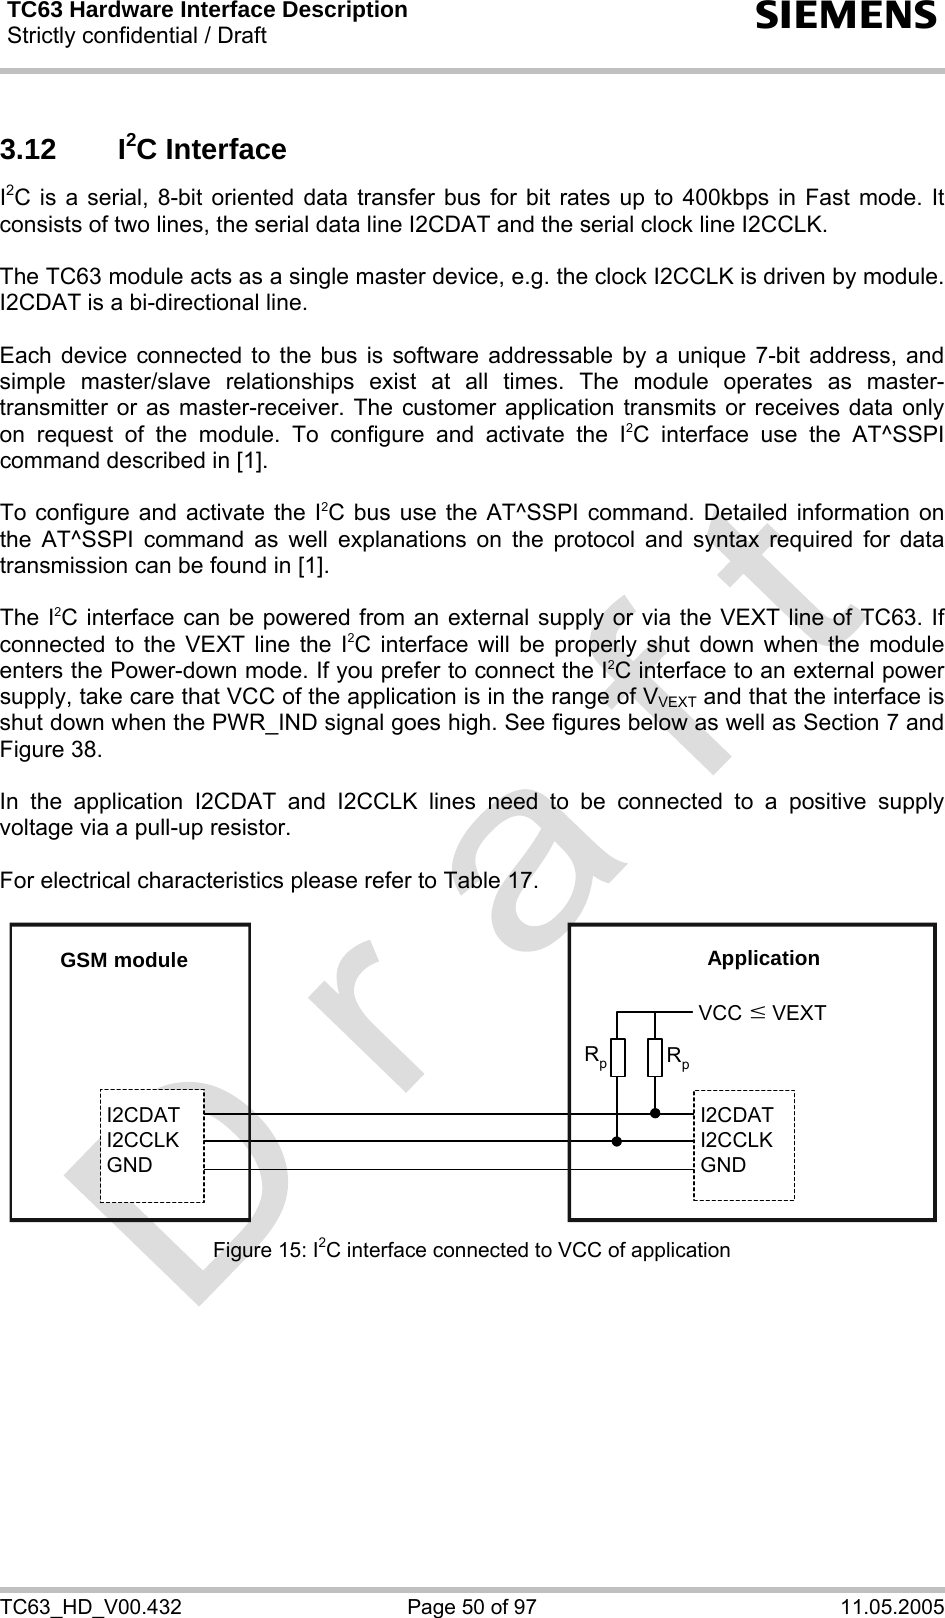 TC63 Hardware Interface Description Strictly confidential / Draft  s TC63_HD_V00.432  Page 50 of 97  11.05.2005 3.12 I2C Interface I2C is a serial, 8-bit oriented data transfer bus for bit rates up to 400kbps in Fast mode. It consists of two lines, the serial data line I2CDAT and the serial clock line I2CCLK.   The TC63 module acts as a single master device, e.g. the clock I2CCLK is driven by module. I2CDAT is a bi-directional line.  Each device connected to the bus is software addressable by a unique 7-bit address, and simple master/slave relationships exist at all times. The module operates as master-transmitter or as master-receiver. The customer application transmits or receives data only on request of the module. To configure and activate the I2C interface use the AT^SSPI command described in [1].  To configure and activate the I2C bus use the AT^SSPI command. Detailed information on the AT^SSPI command as well explanations on the protocol and syntax required for data transmission can be found in [1].  The I2C interface can be powered from an external supply or via the VEXT line of TC63. If connected to the VEXT line the I2C interface will be properly shut down when the module enters the Power-down mode. If you prefer to connect the I2C interface to an external power supply, take care that VCC of the application is in the range of VVEXT and that the interface is shut down when the PWR_IND signal goes high. See figures below as well as Section 7 and Figure 38.  In the application I2CDAT and I2CCLK lines need to be connected to a positive supply voltage via a pull-up resistor.   For electrical characteristics please refer to Table 17.  GSM moduleI2CDATI2CCLKGNDI2CDATI2CCLKGNDApplicationVCCRpRpwVEXT Figure 15: I2C interface connected to VCC of application  